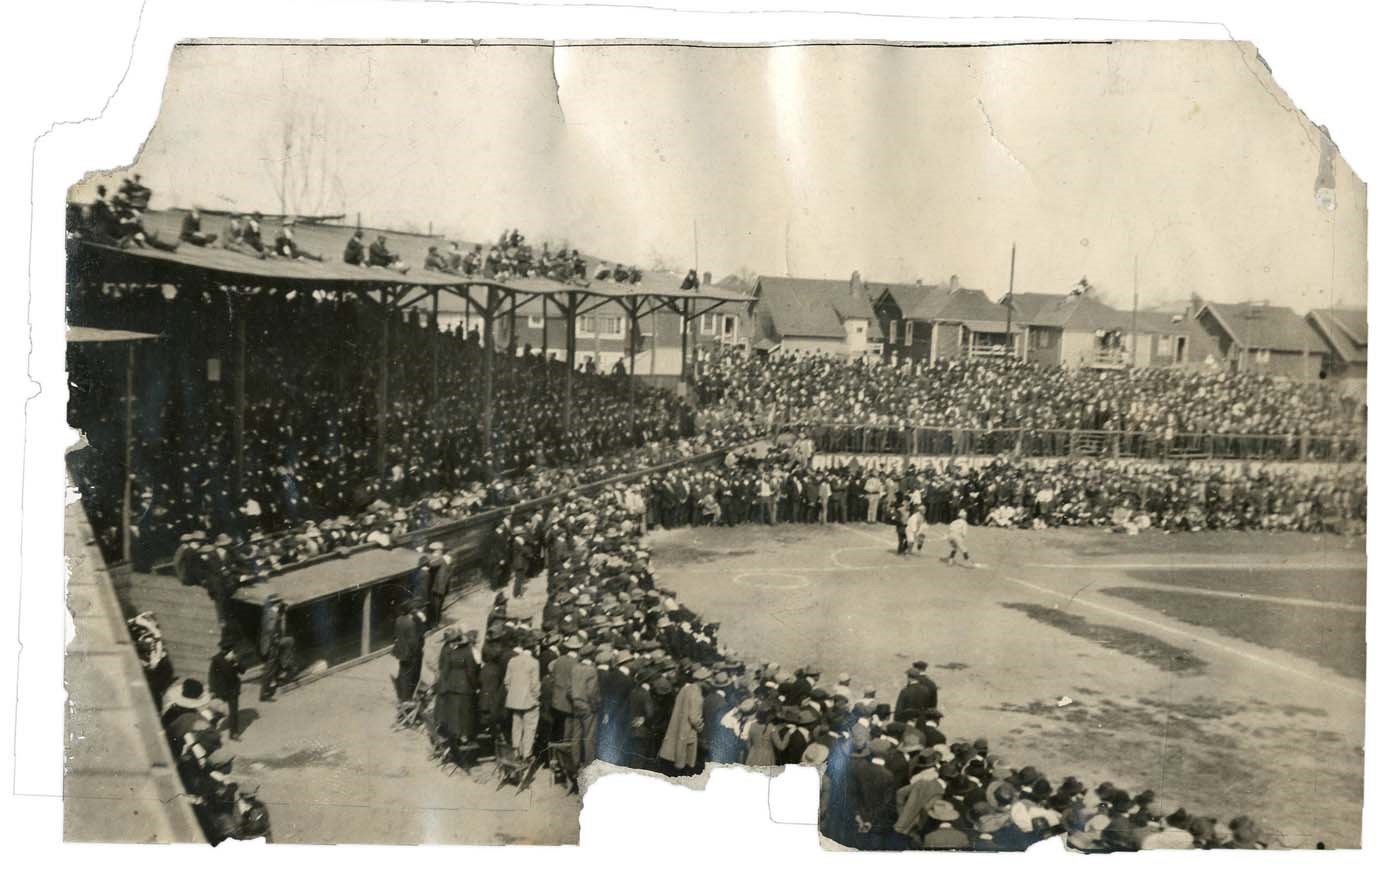 Negro League, Latin, Japanese & International Base - Early 1920s Chicago American Giants at Southside Park Action Photograph (ex-Rube Foster Family)